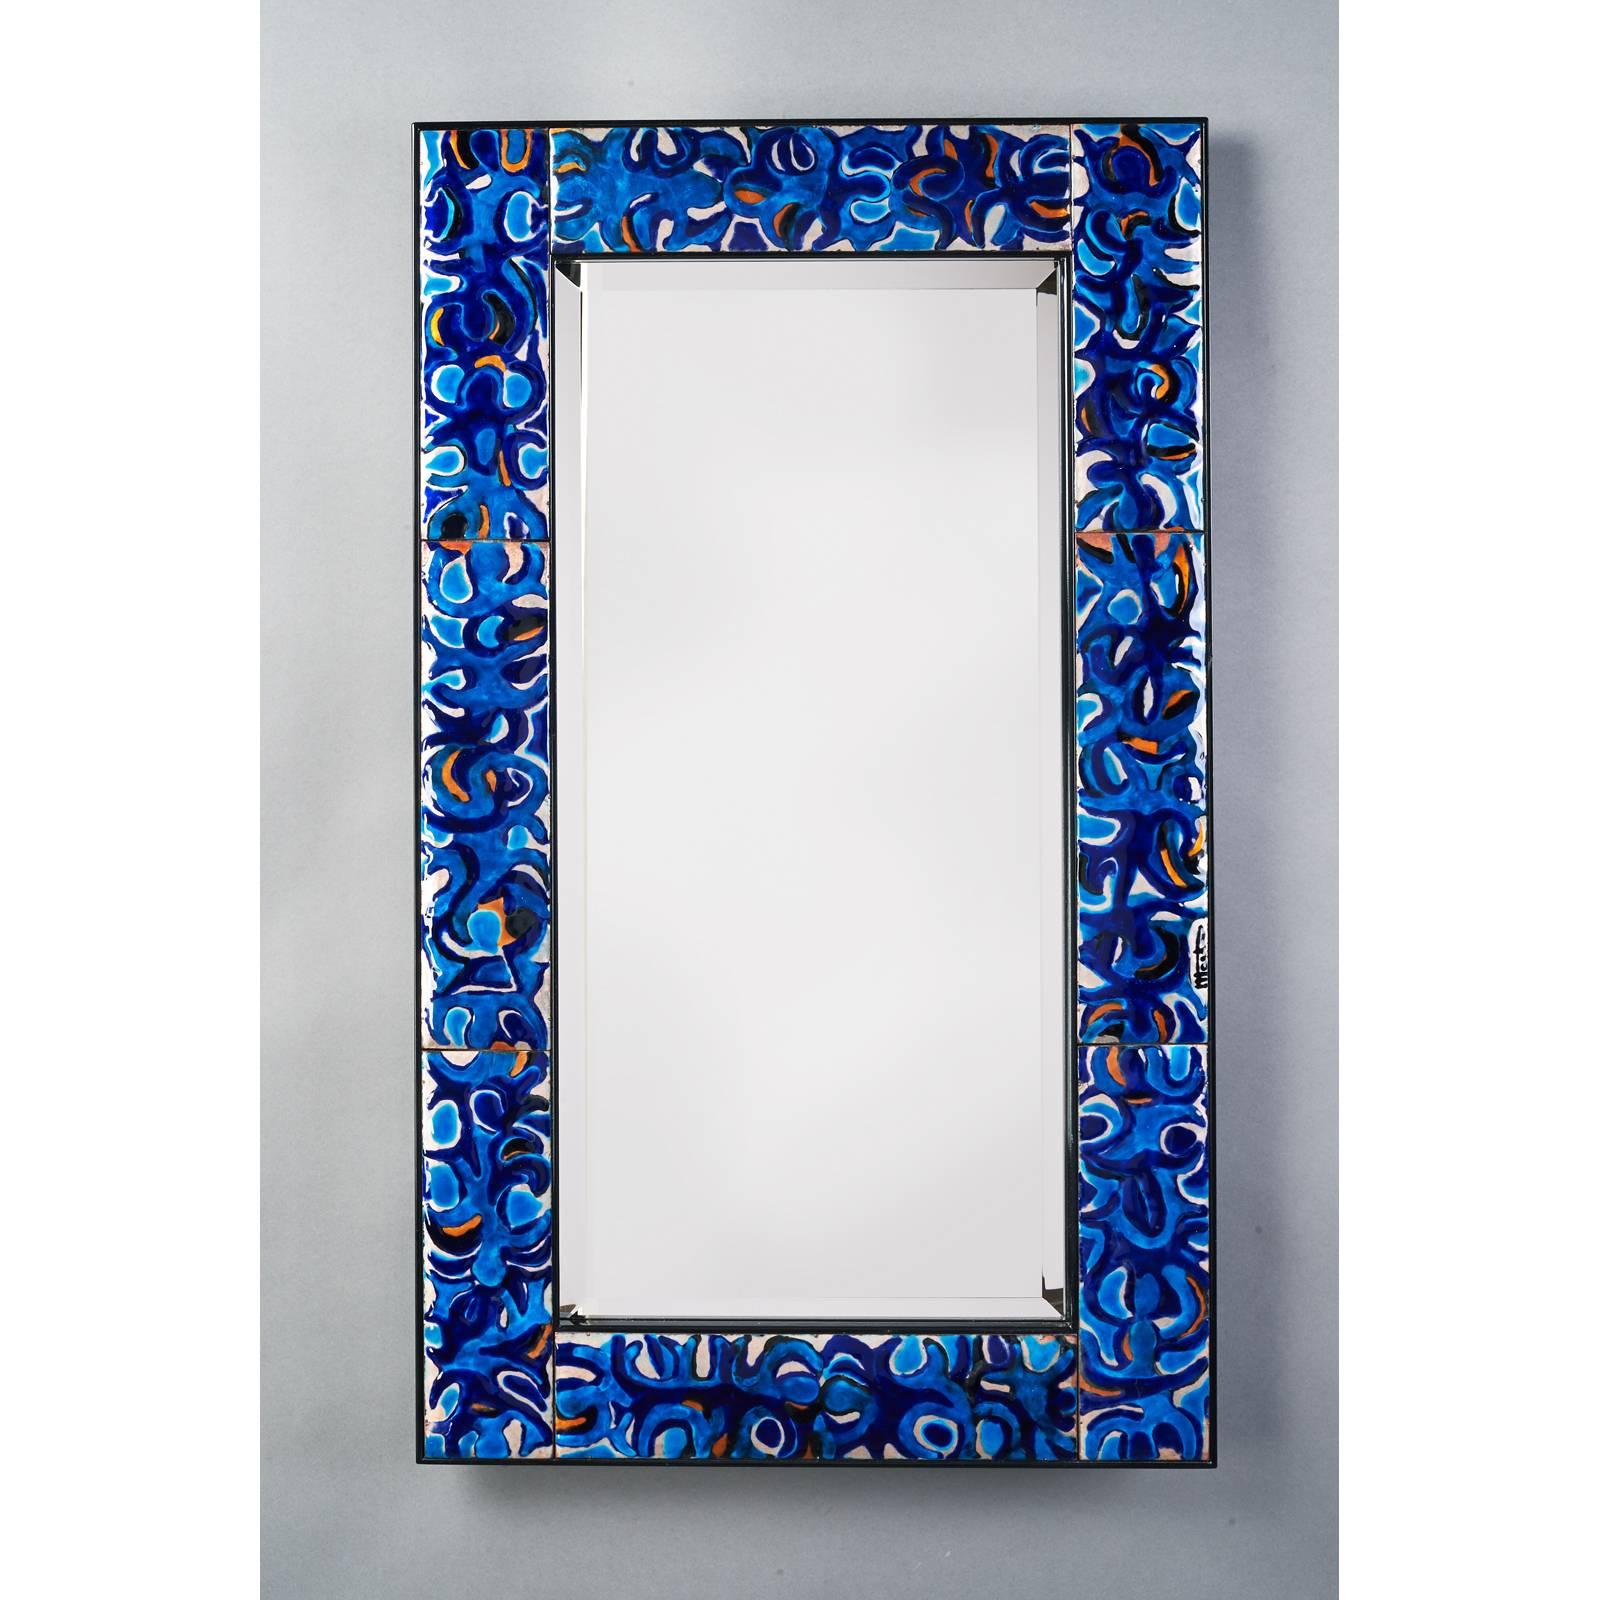 Bruno Martinazzi ( b.1923)
Rare mirror by renowned Italian jewelry designer Bruno Martinazzi
Vitreous Enamel on copper with black lacquered frame
Signed, Italy, circa 1970
Dimensions: 42 H x 24 W x 2 D.